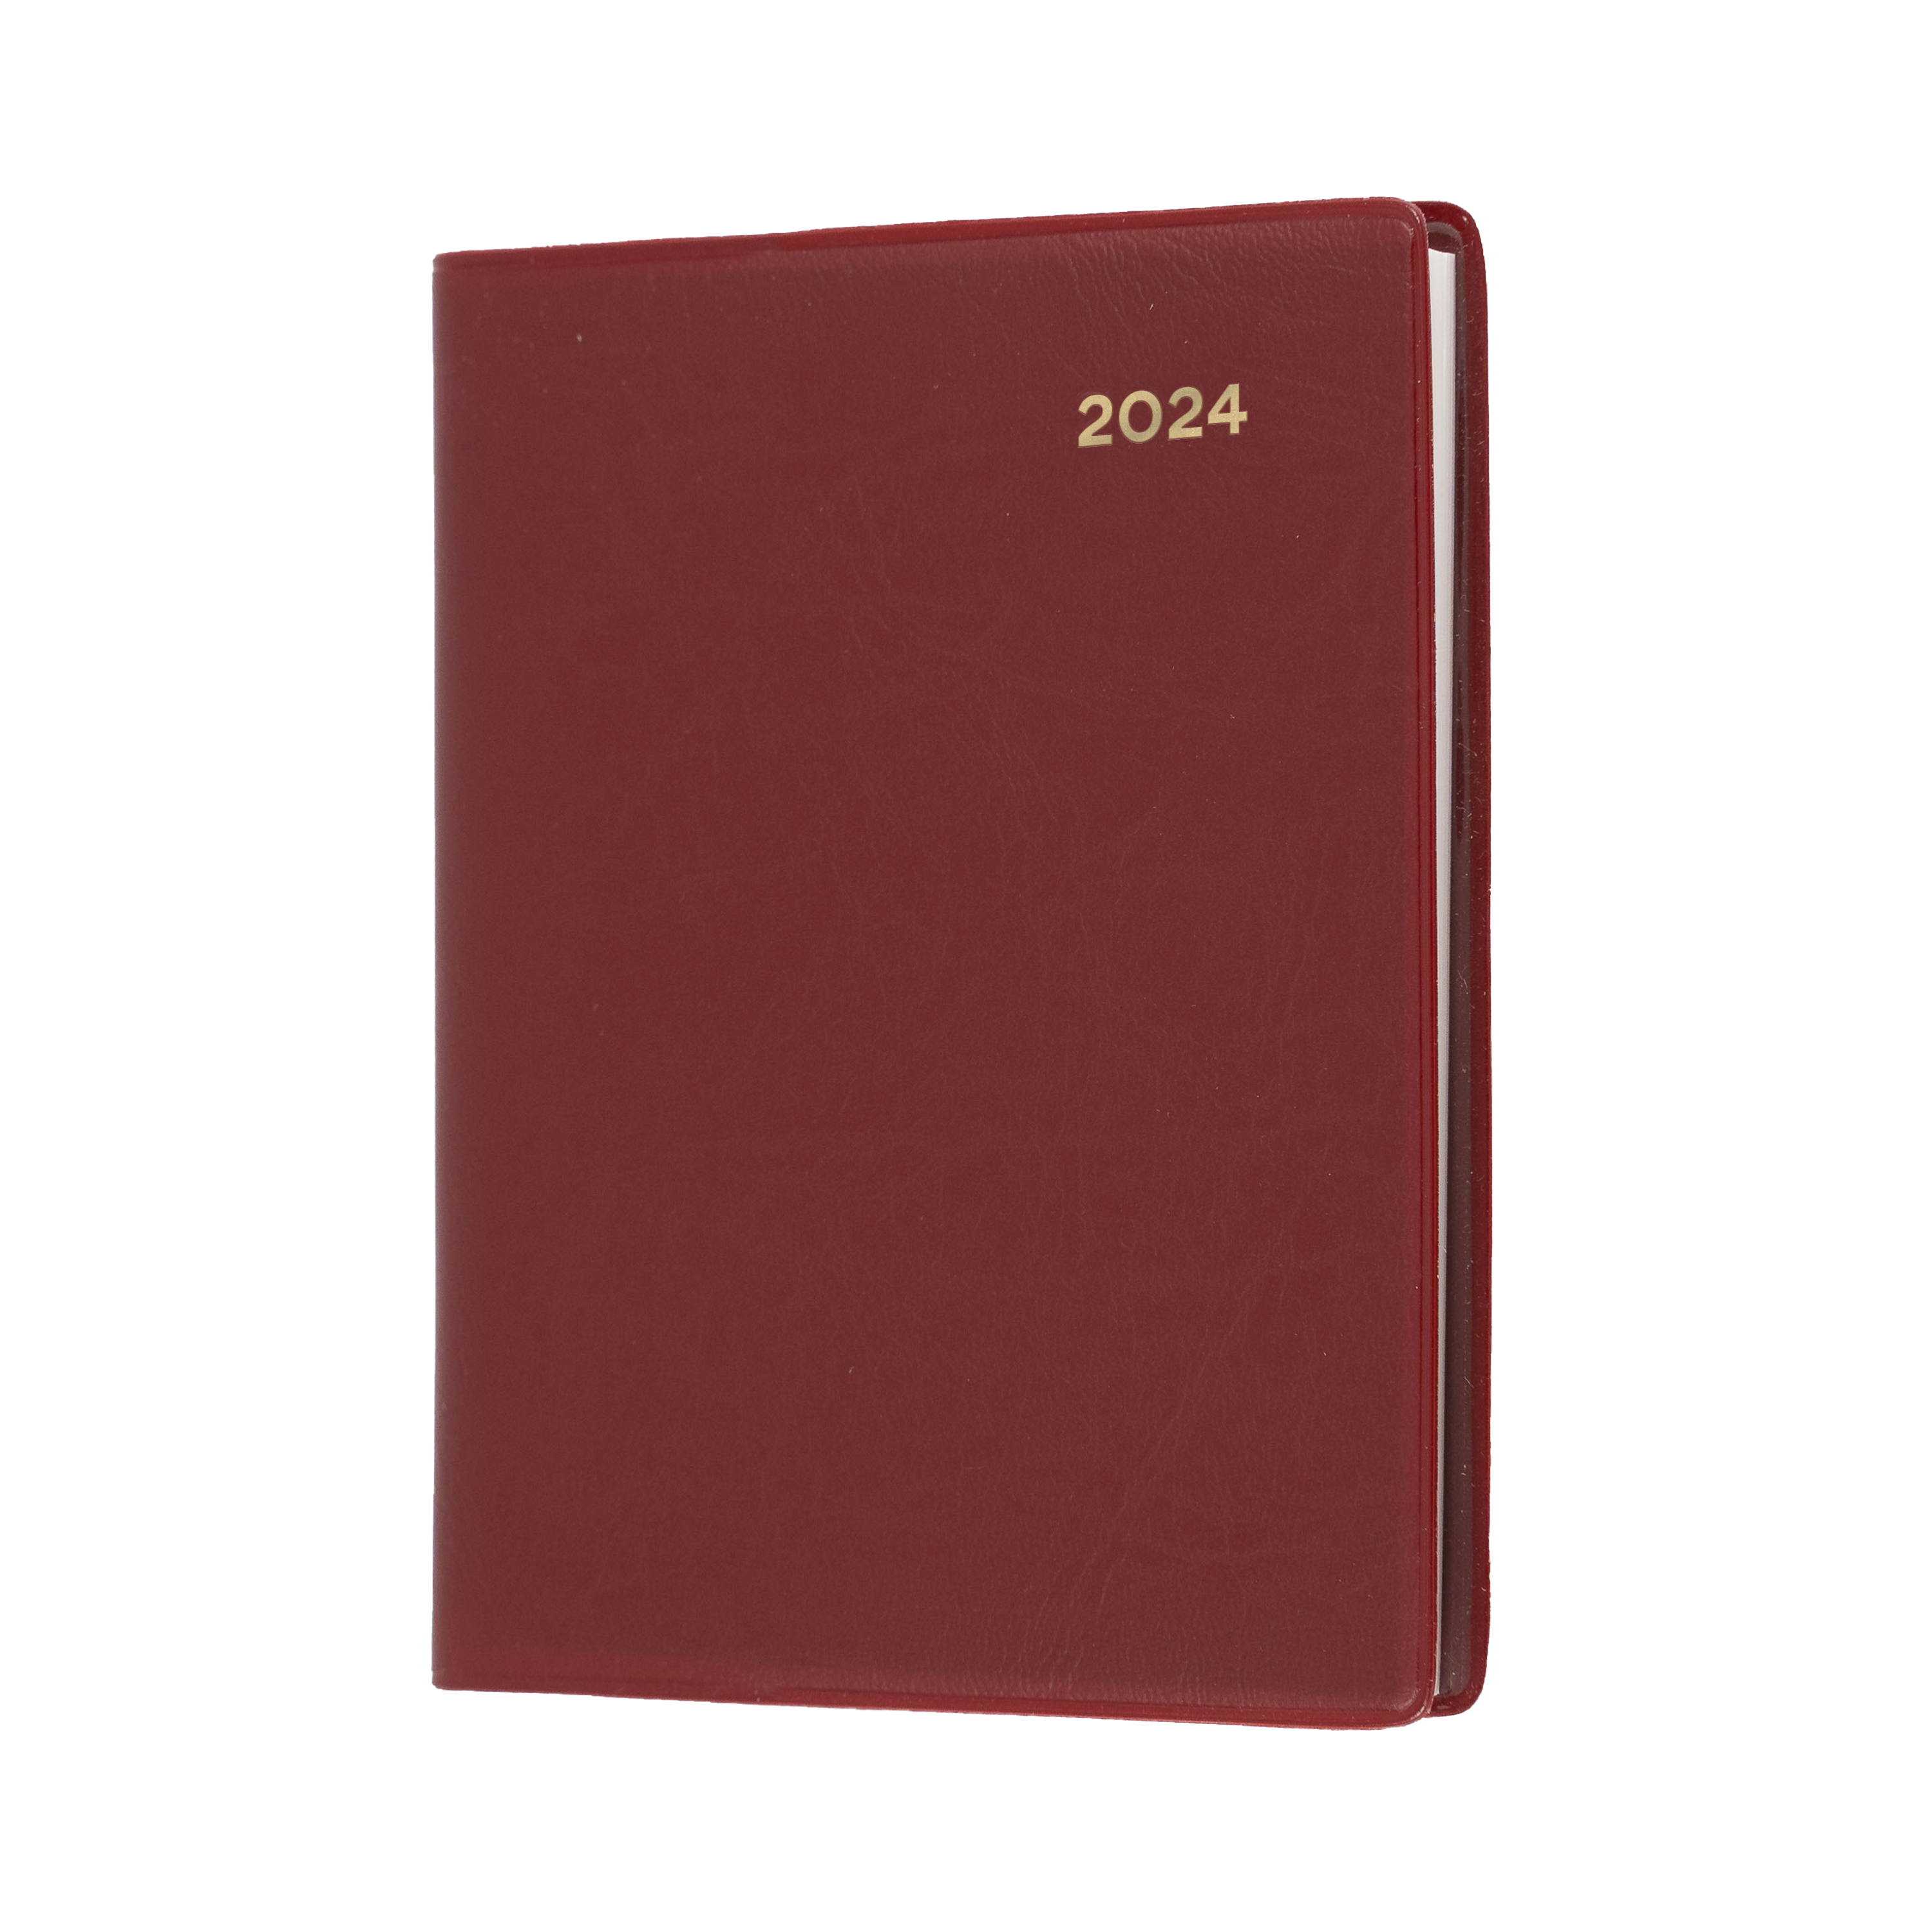 Collins Belmont Pocket 2024 Diary - B6/7 (176 x 88mm), Week to View